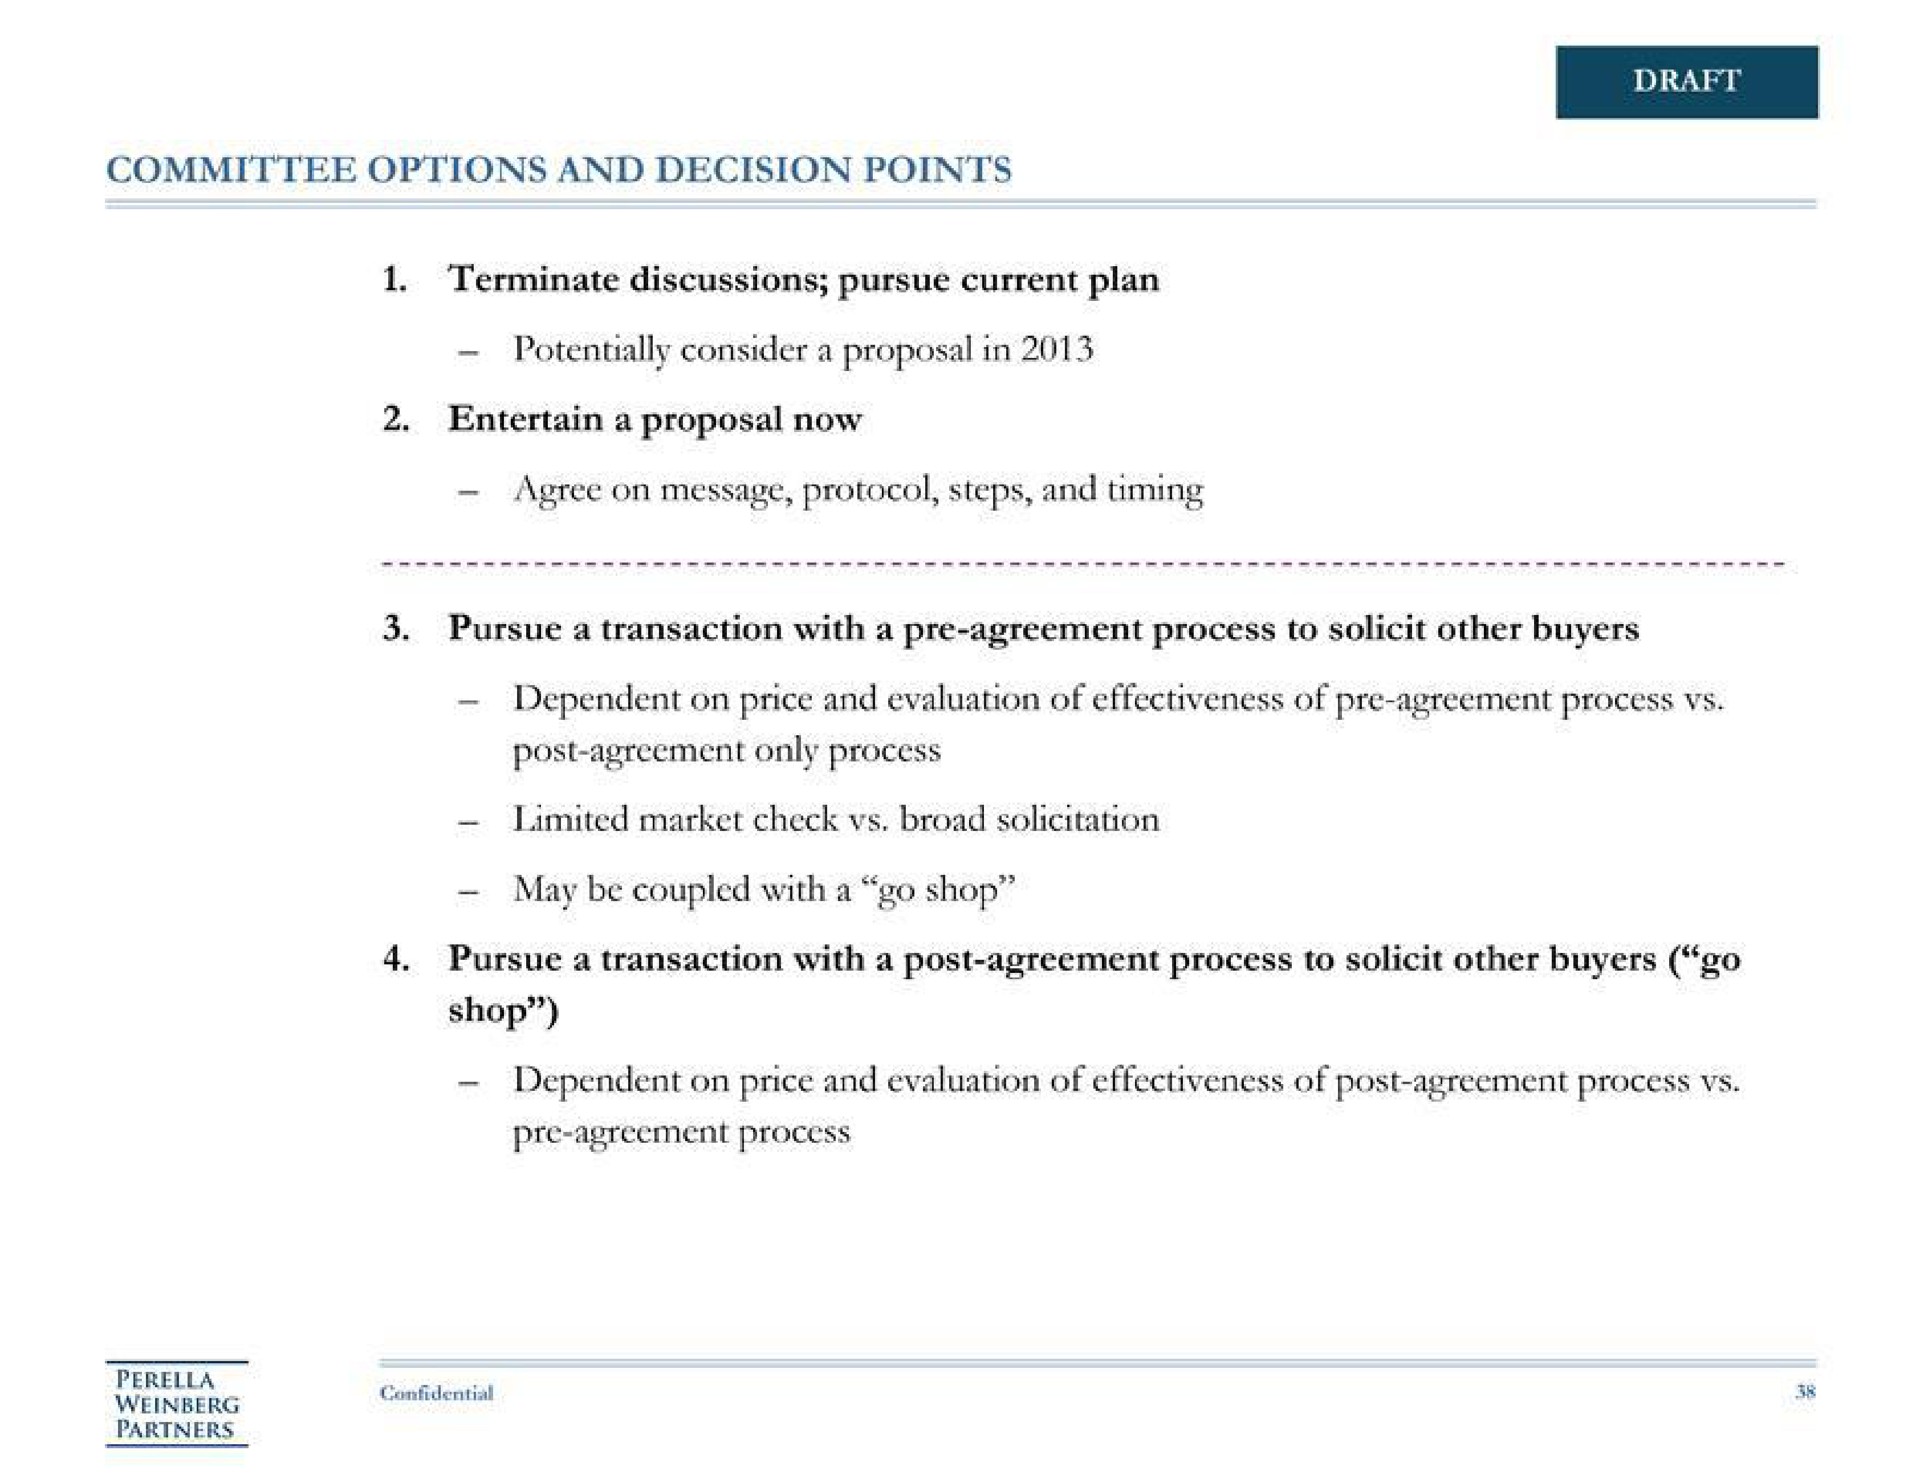 committee options and decision points terminate discussions pursue current plan potentially consider a proposal in entertain a proposal now agree on message protocol steps and timing draft pursue a transaction with a agreement process to solicit other buyers dependent on price and evaluation of effectiveness of agreement process post agreement only process market check broad solicitation may be coupled with a go shop pursue a transaction with a post agreement process to solicit other buyers go shop dependent on price and evaluation of effectiveness of post agreement process agreement process partners | Perella Weinberg Partners